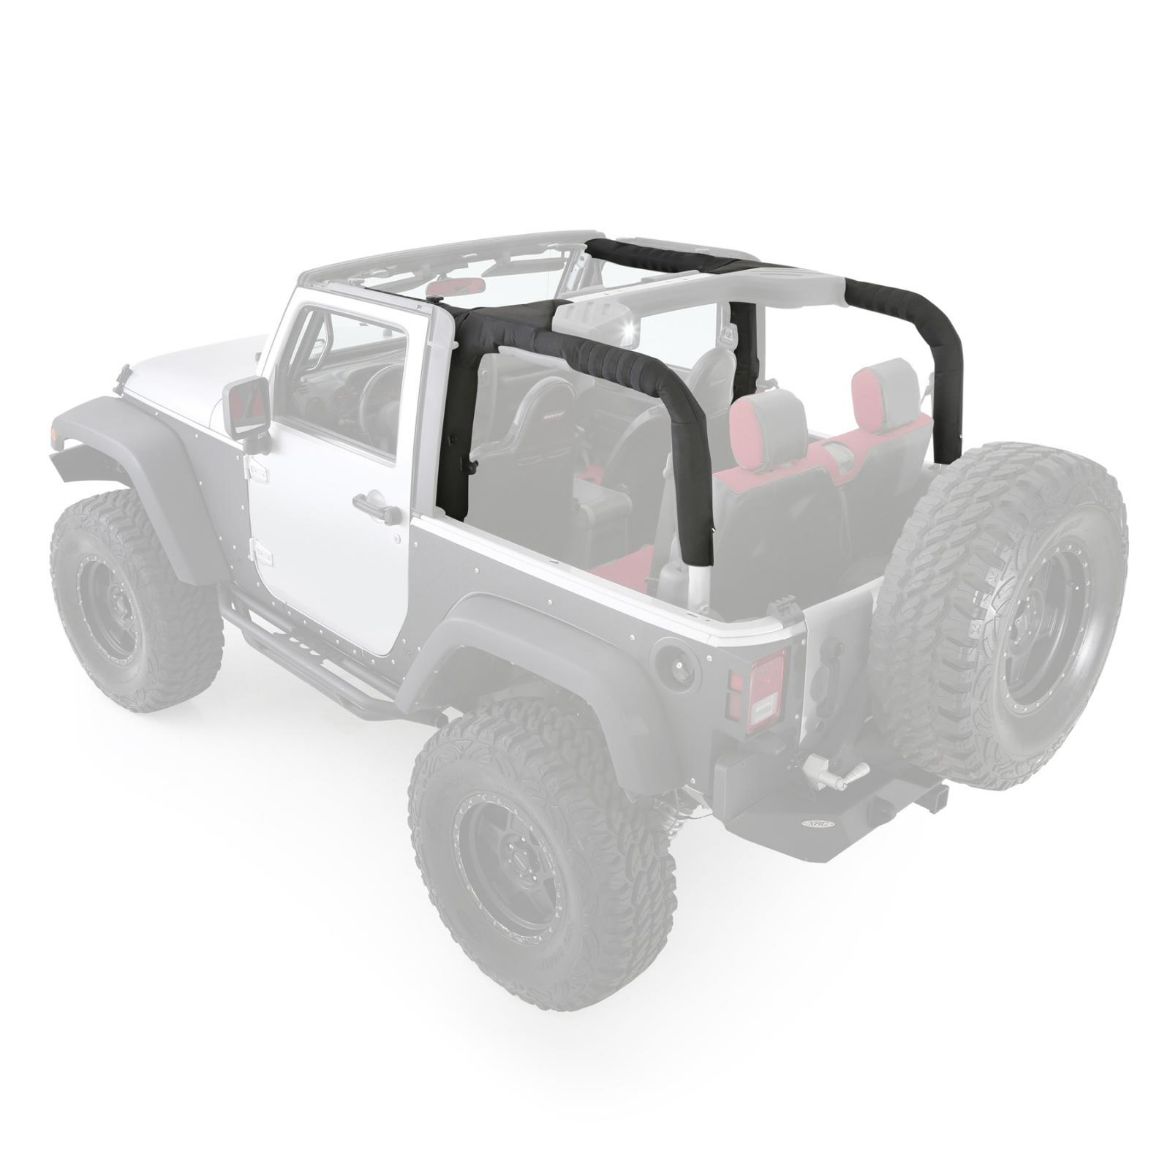 Picture of Replacement MOLLE Roll Bar Padding Cover Kit 07-Pres Wrangler JK Smittybilt